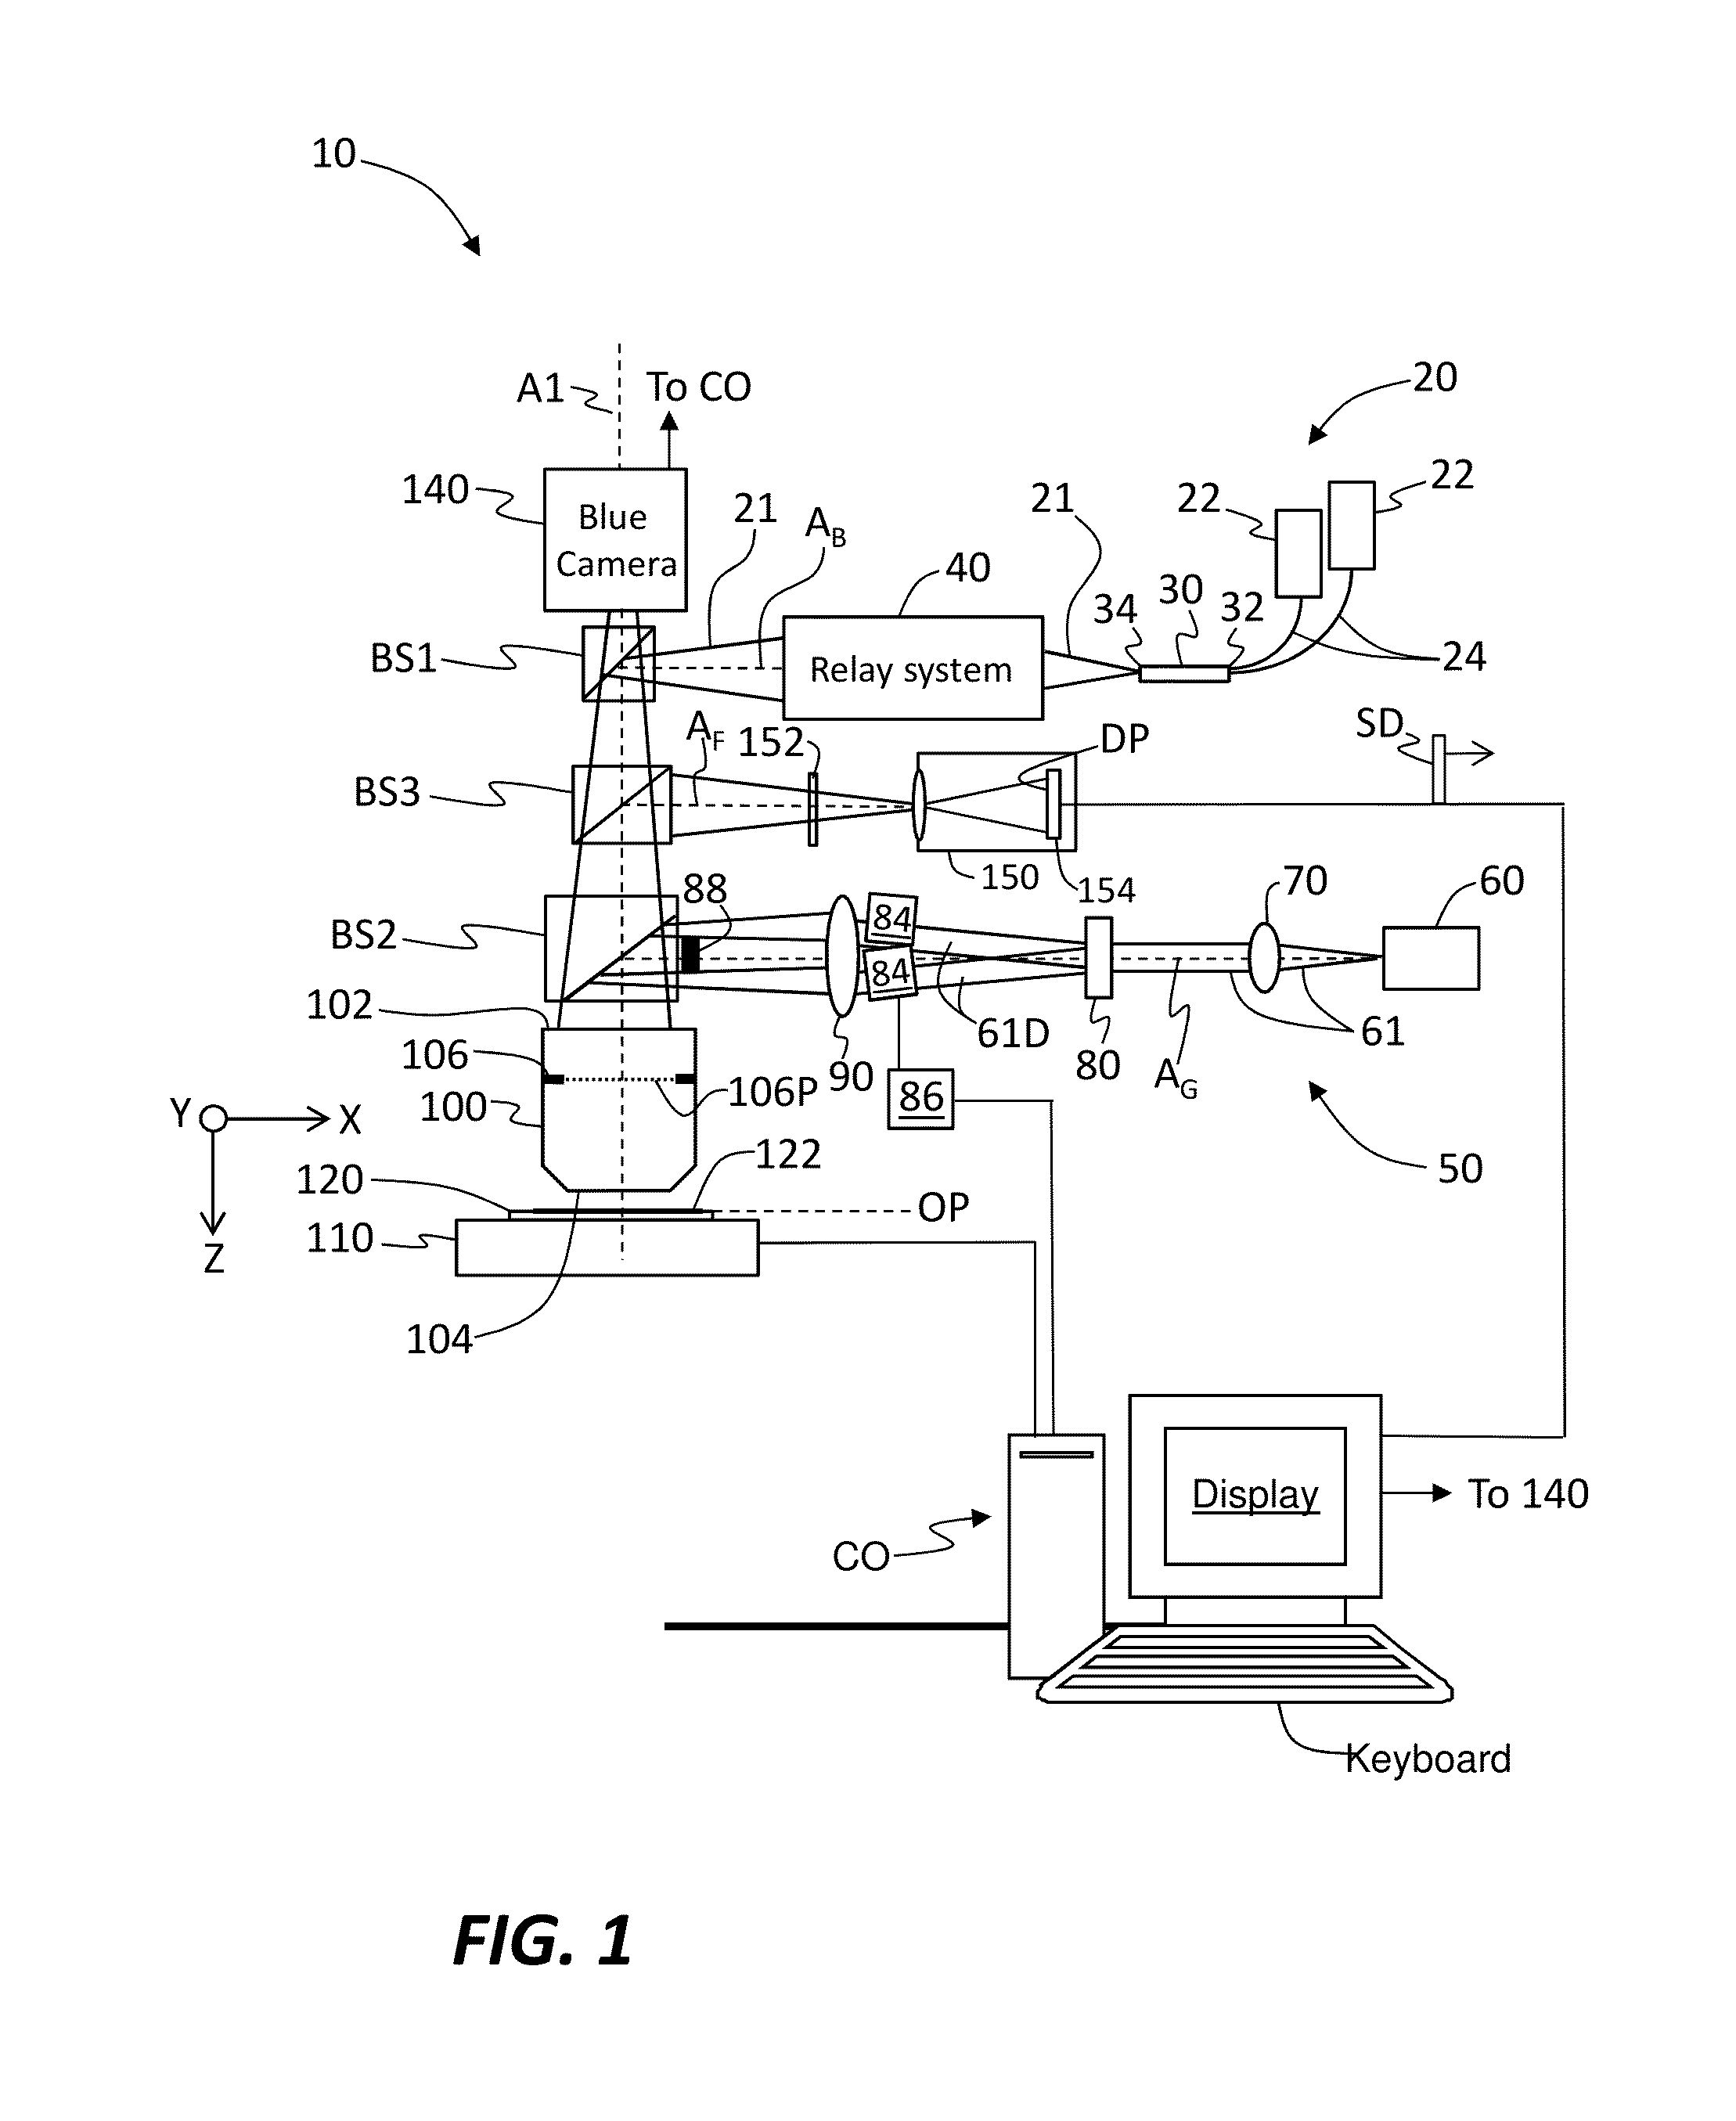 Apparatus and methods for microscopy having resolution beyond the Abbe limit